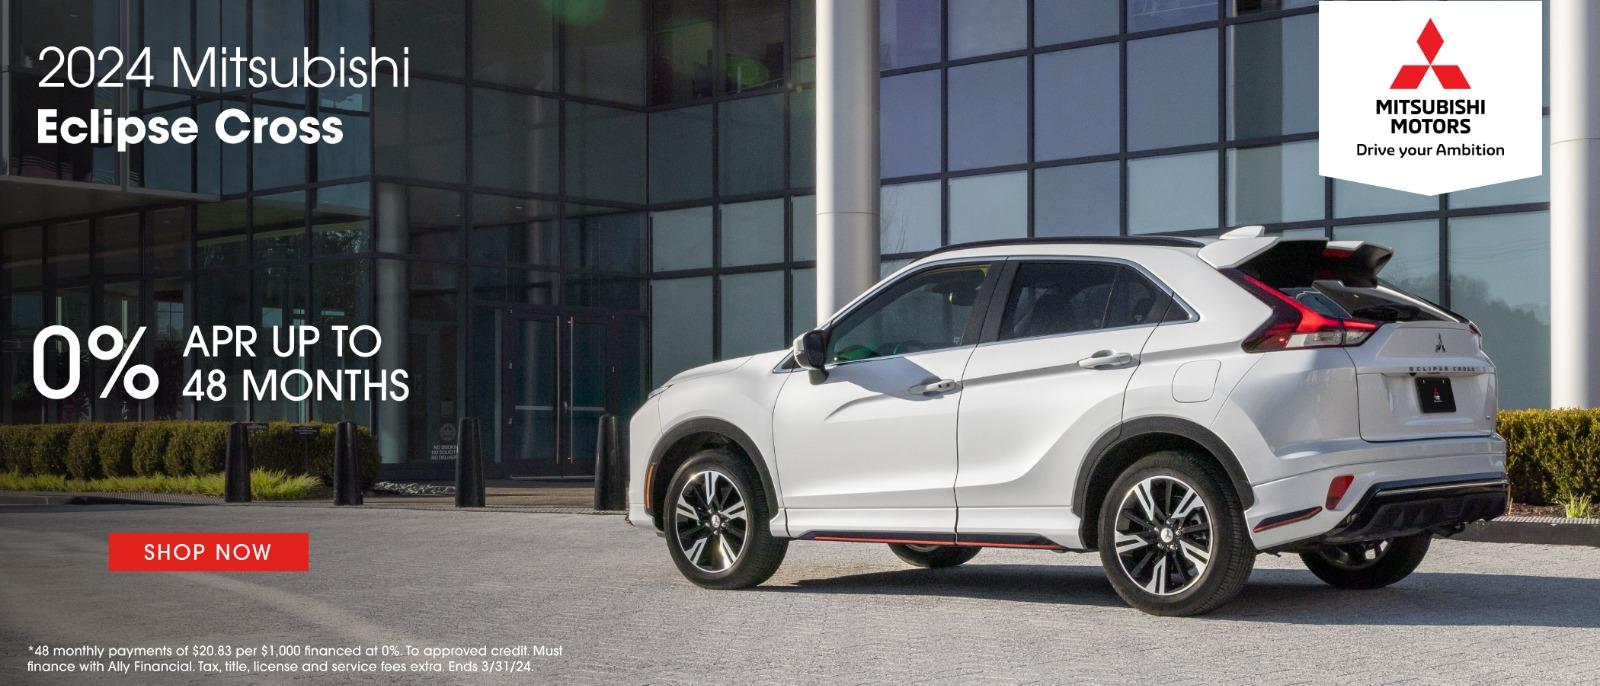 2024 Mitsubishi Eclipse Cross | 0% APR for 48 months